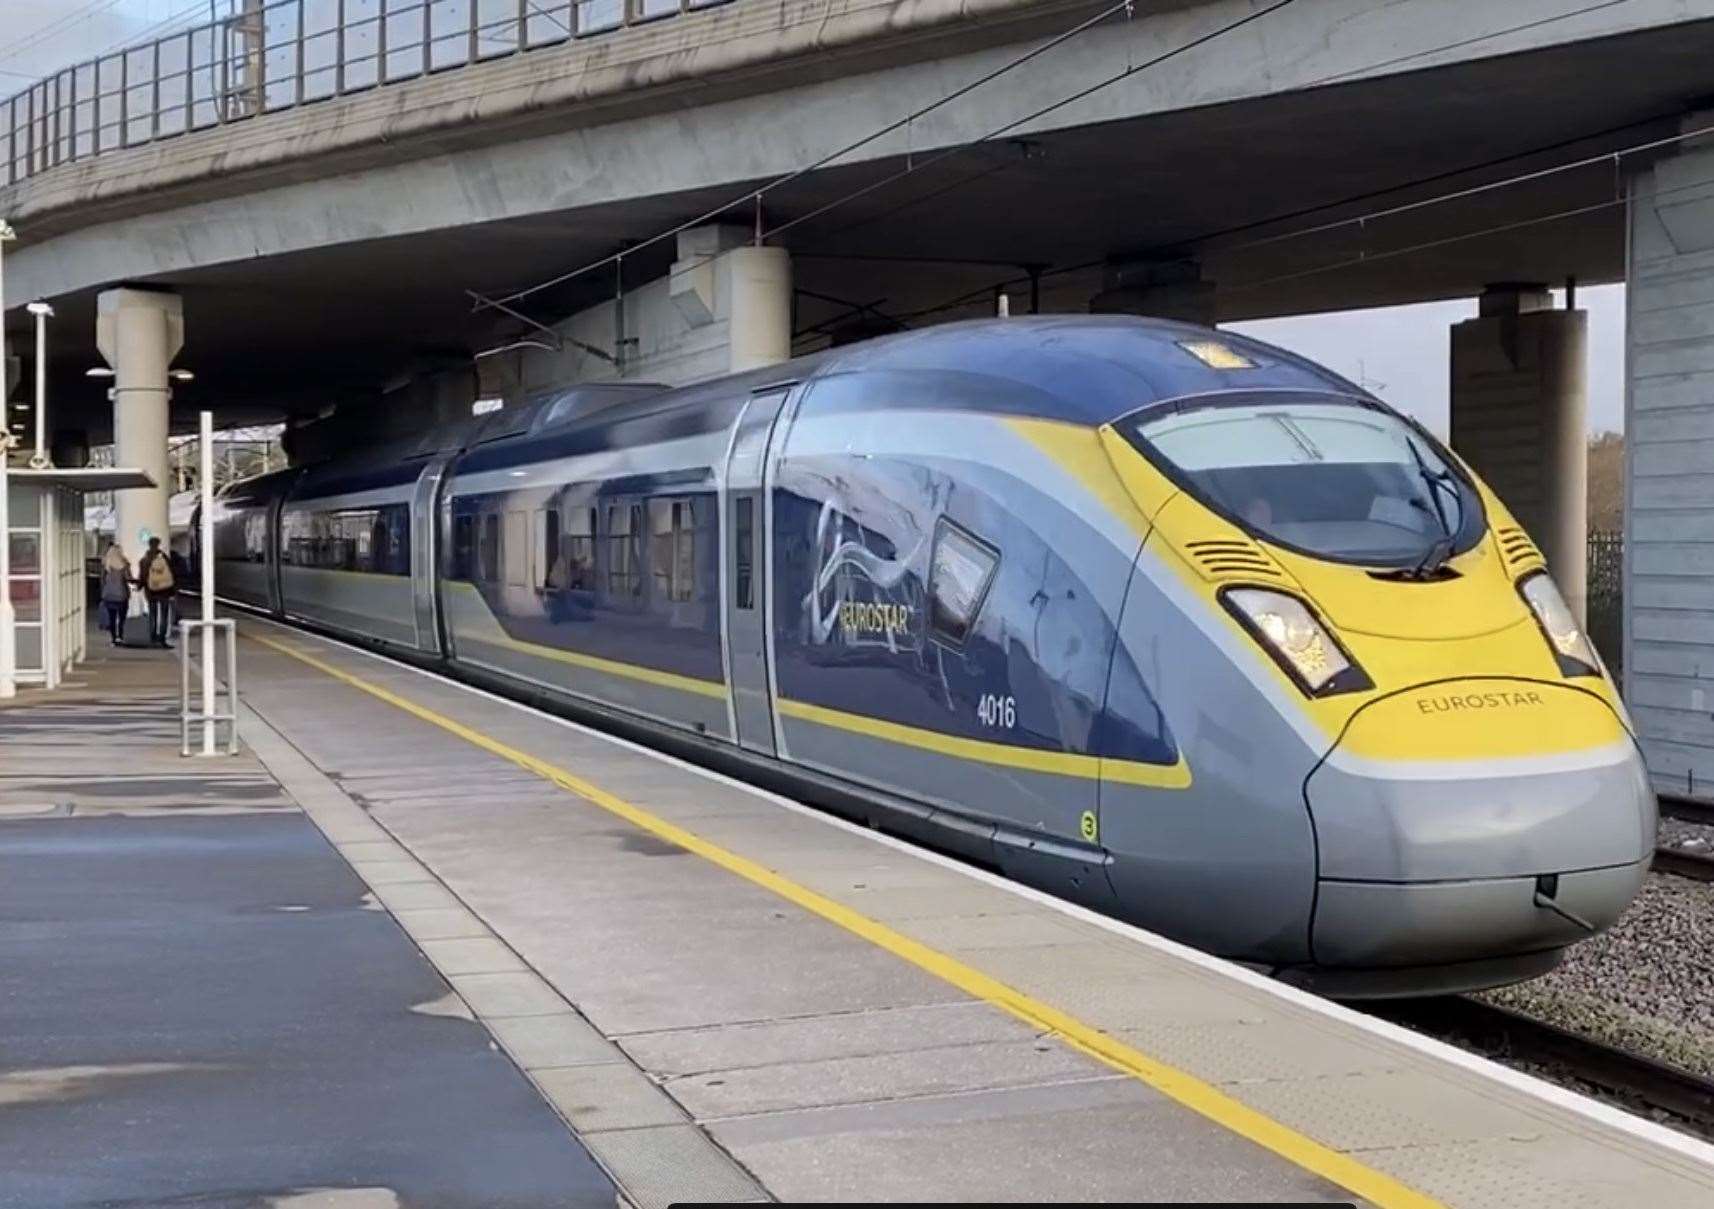 Eurostar faces financial collapse due to the pandemic, it has been warned. Picture Steve Salter